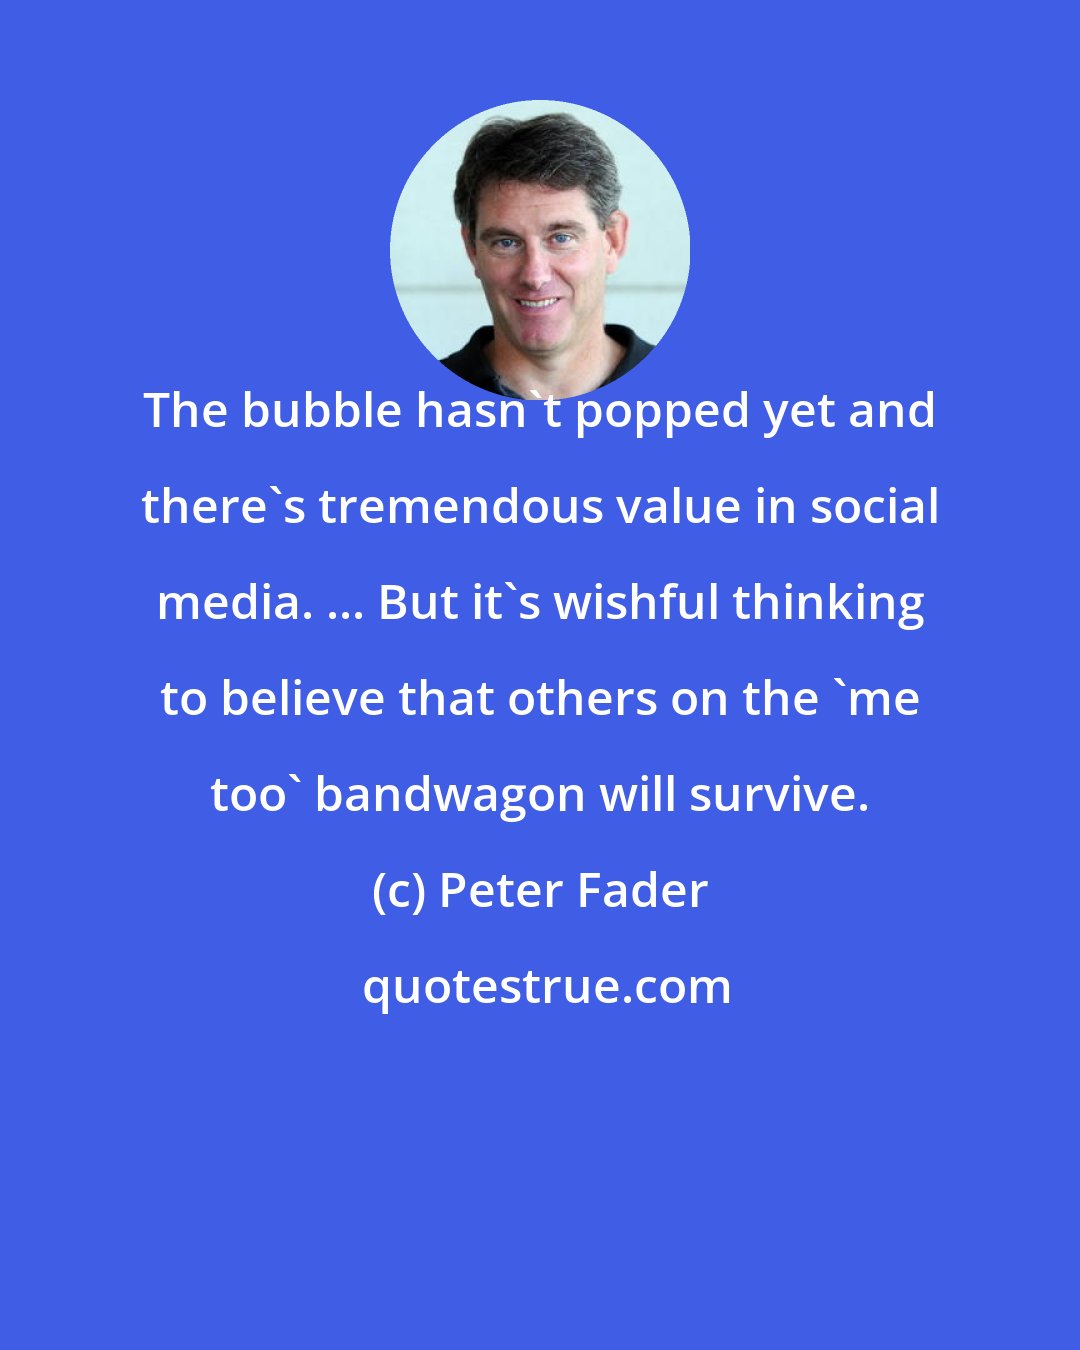 Peter Fader: The bubble hasn't popped yet and there's tremendous value in social media. ... But it's wishful thinking to believe that others on the 'me too' bandwagon will survive.